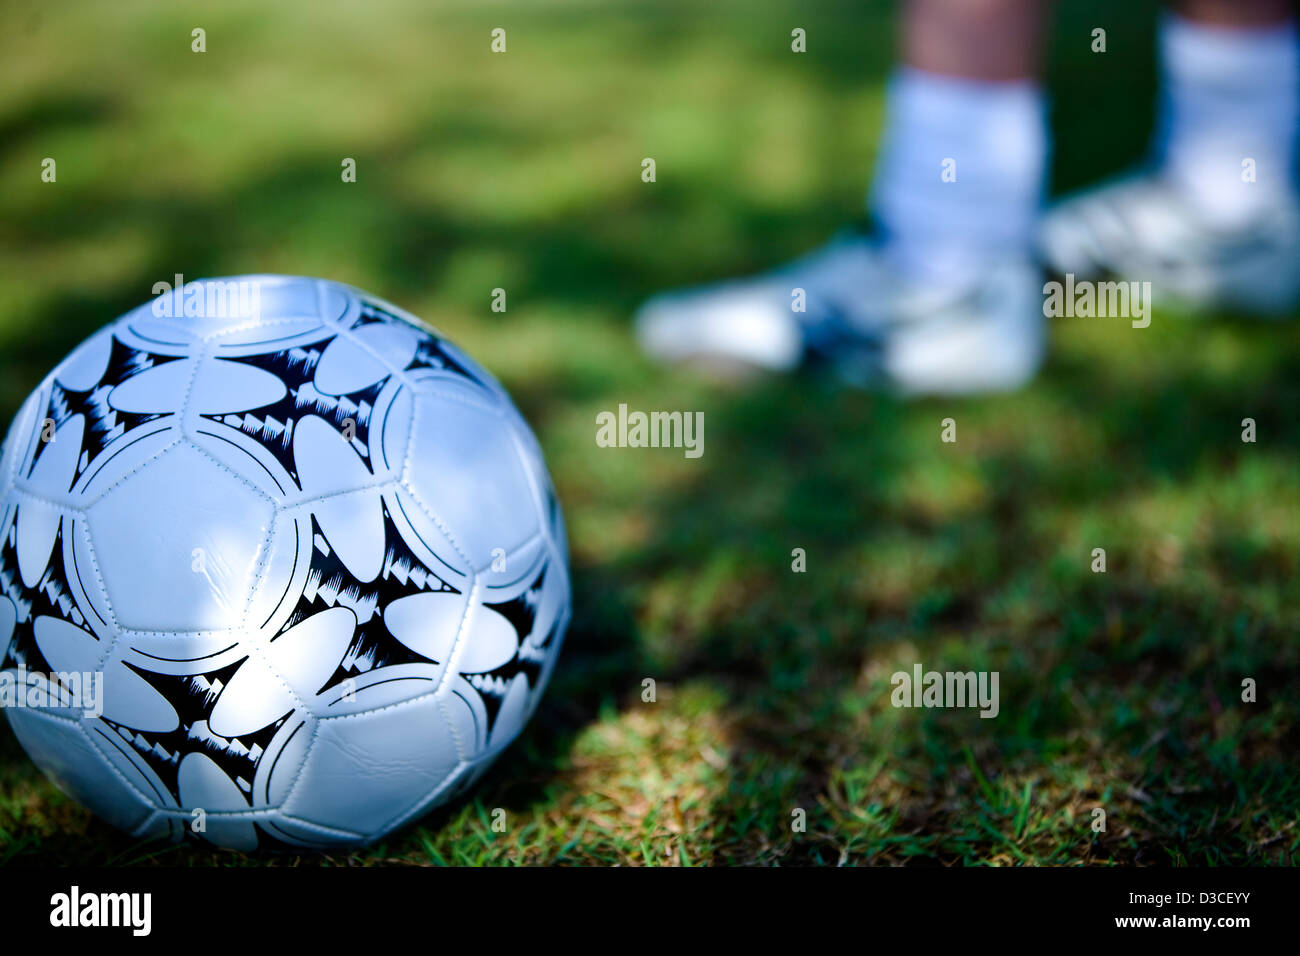 Sports field with ground level image of a football and person standing in the background Stock Photo